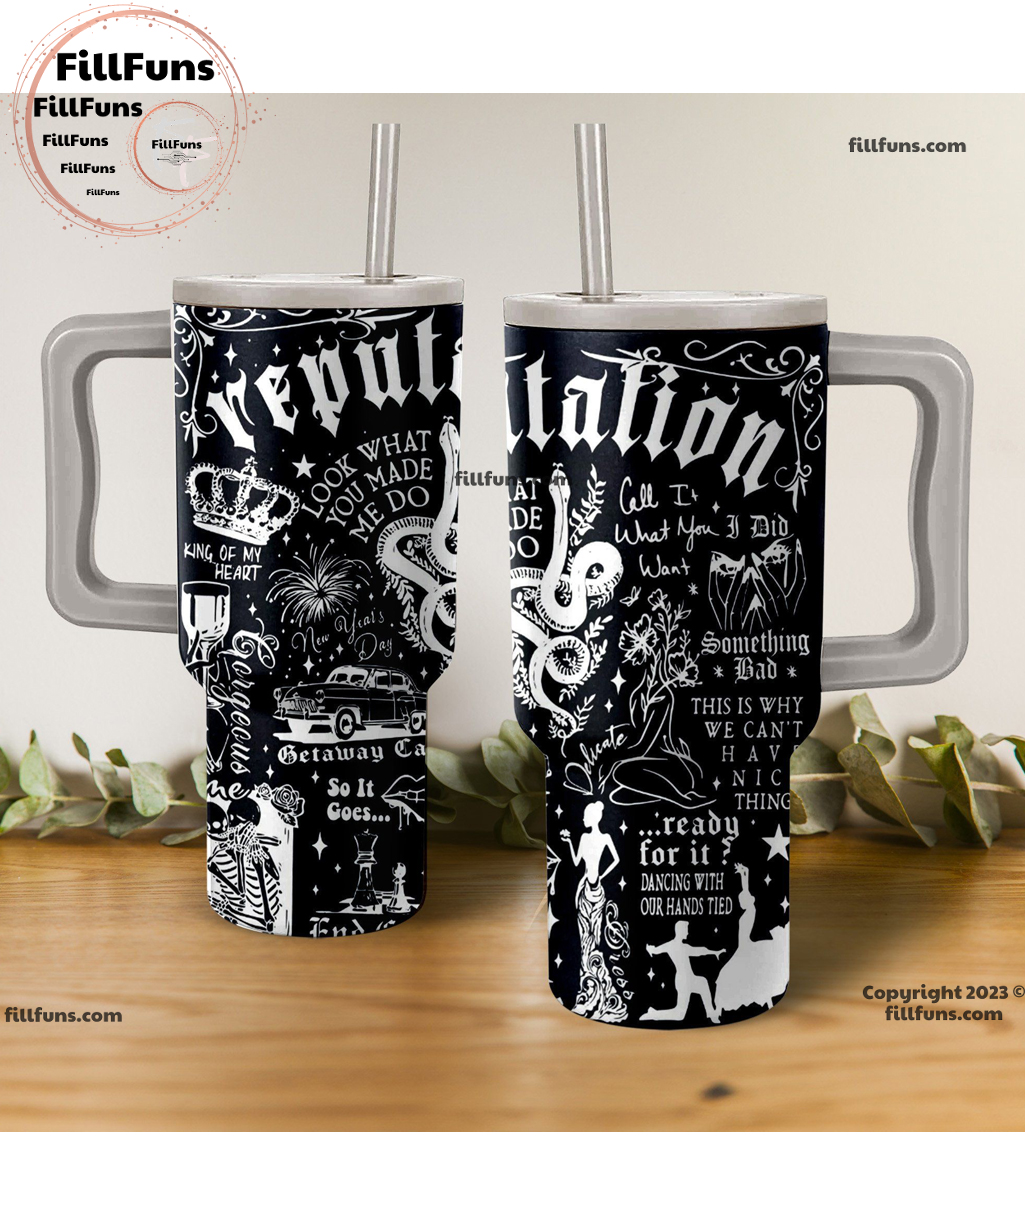 https://fillfuns.com/wp-content/uploads/2024/01/taylor-swift-reputation-40oz-tumbler-with-handle-and-straw-1-8Hvyi.jpg